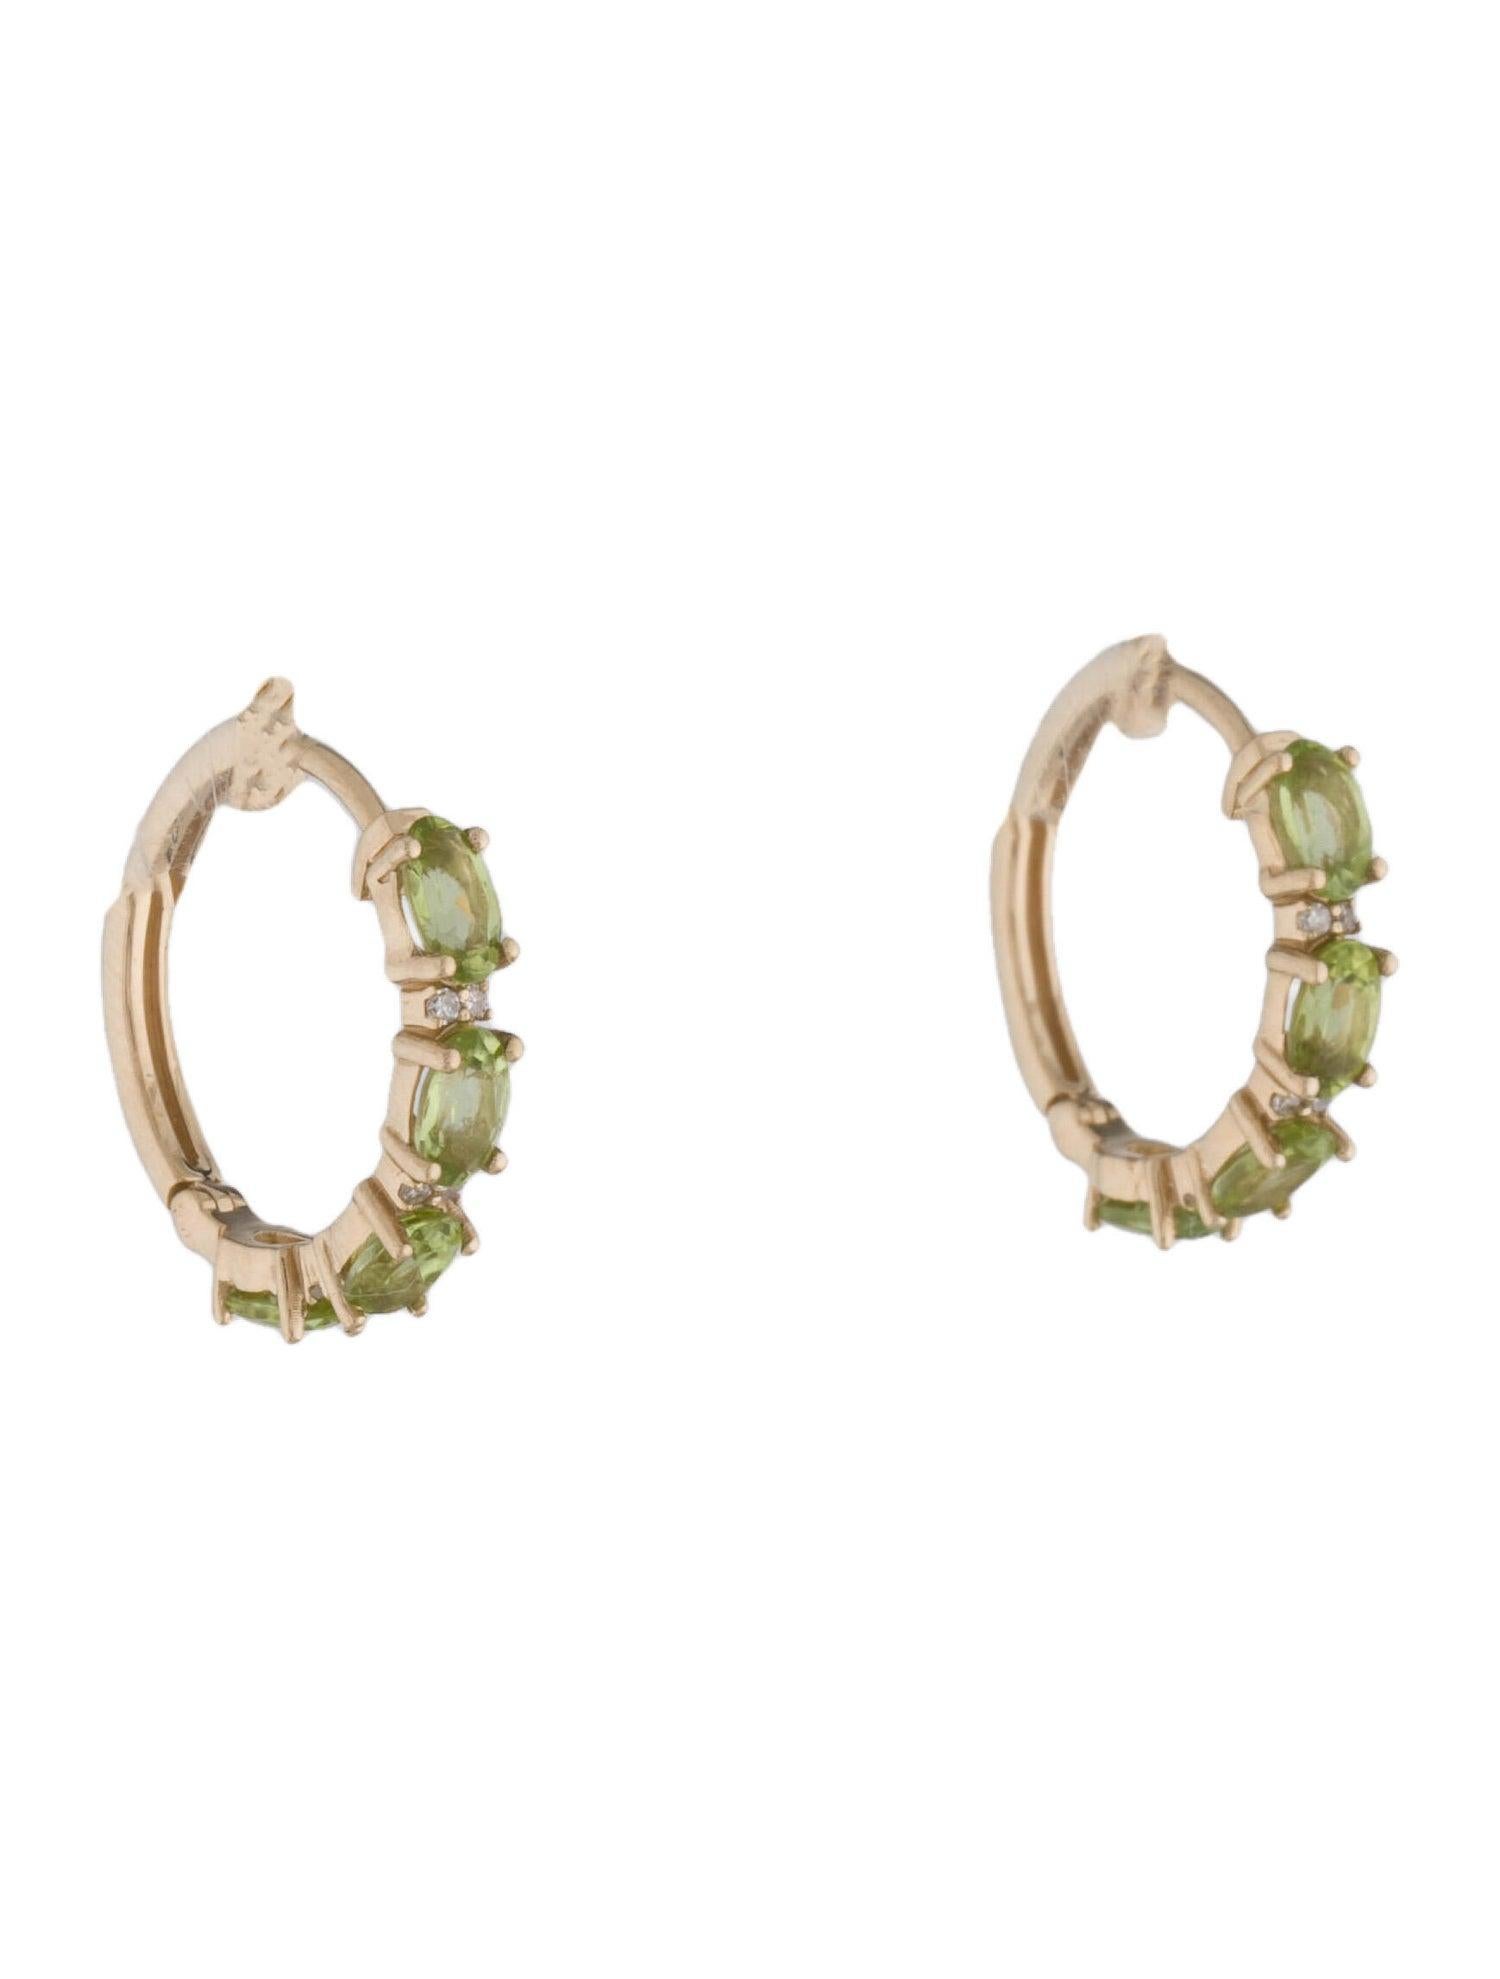 14K Peridot & Diamond Hoop Earrings - Elegant Gemstone Jewelry, Timeless Sparkle In New Condition For Sale In Holtsville, NY